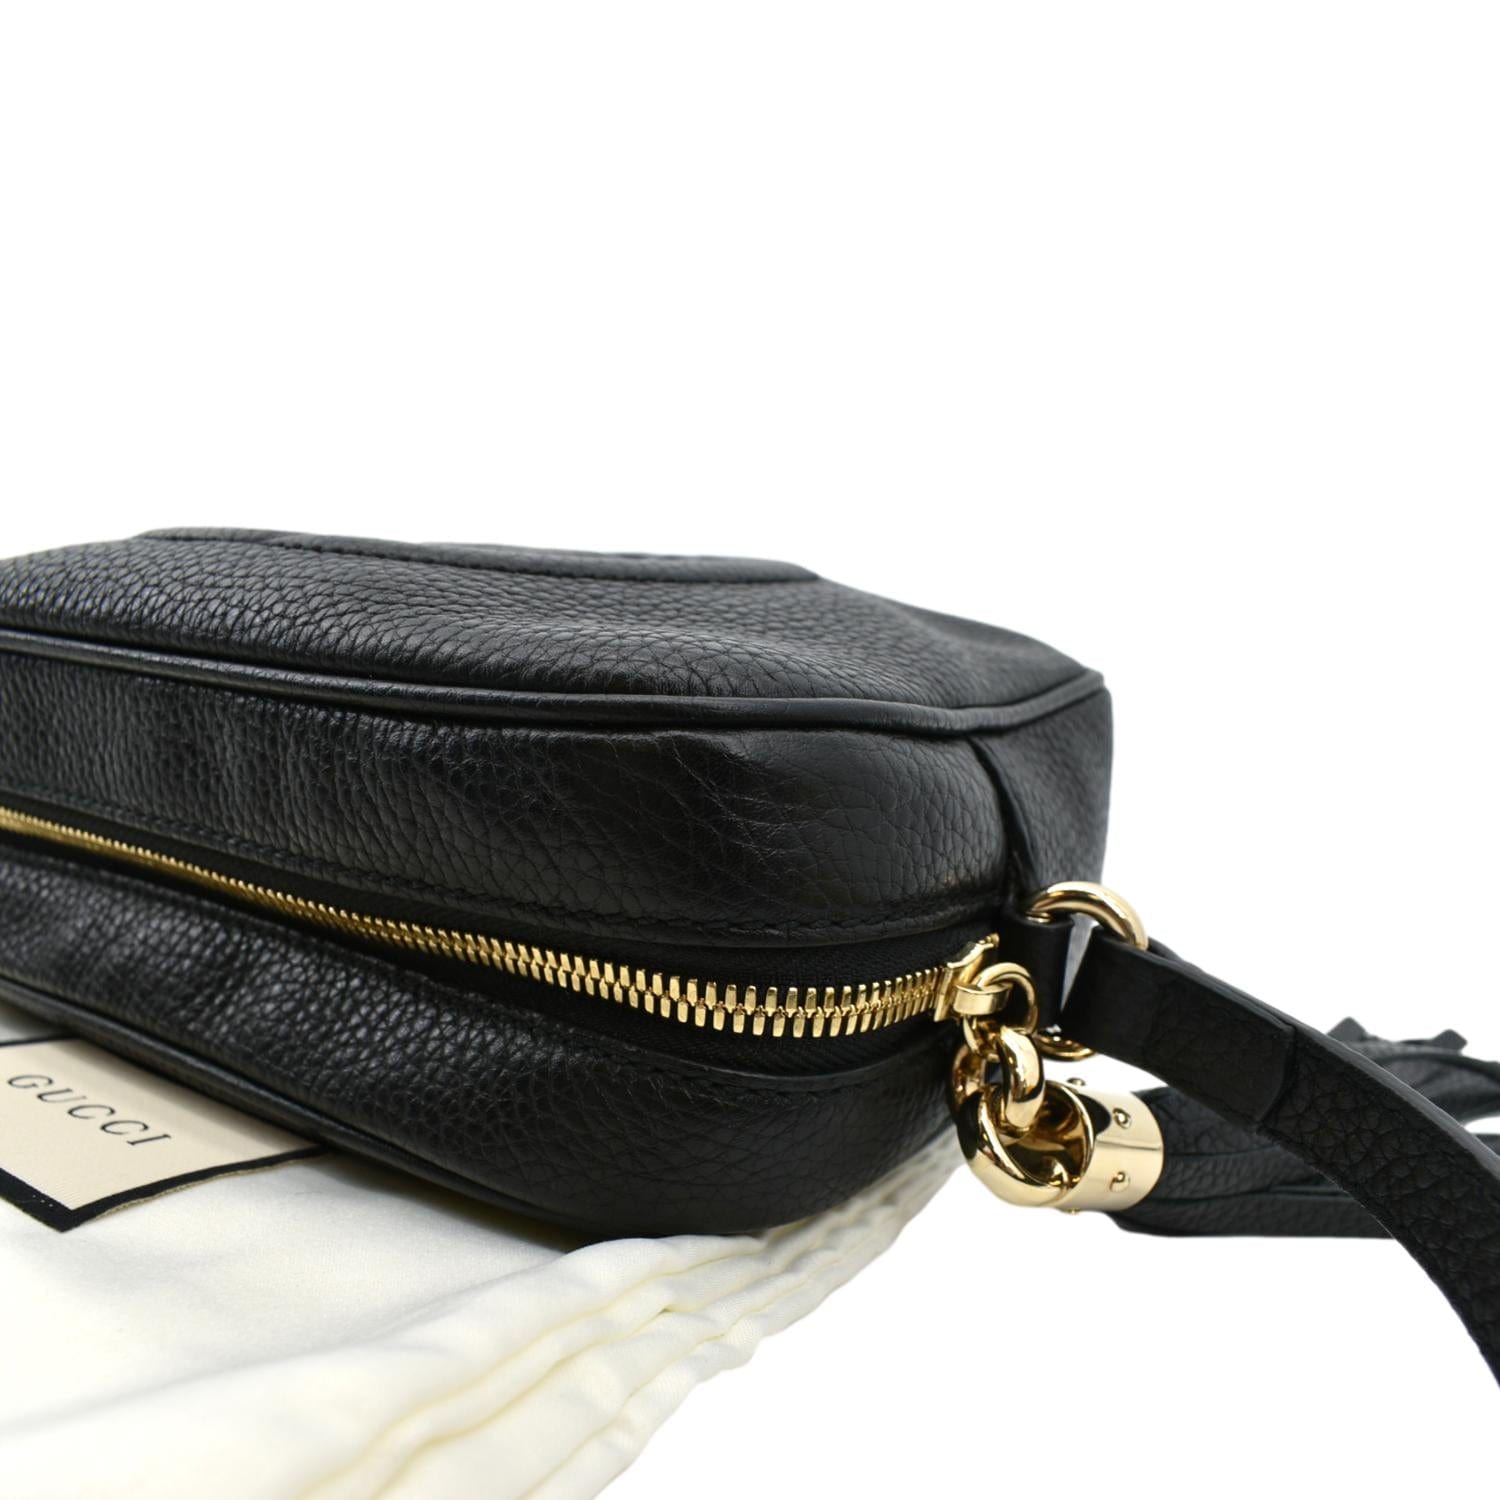 Soho leather crossbody bag Gucci Black in Leather - 28873695